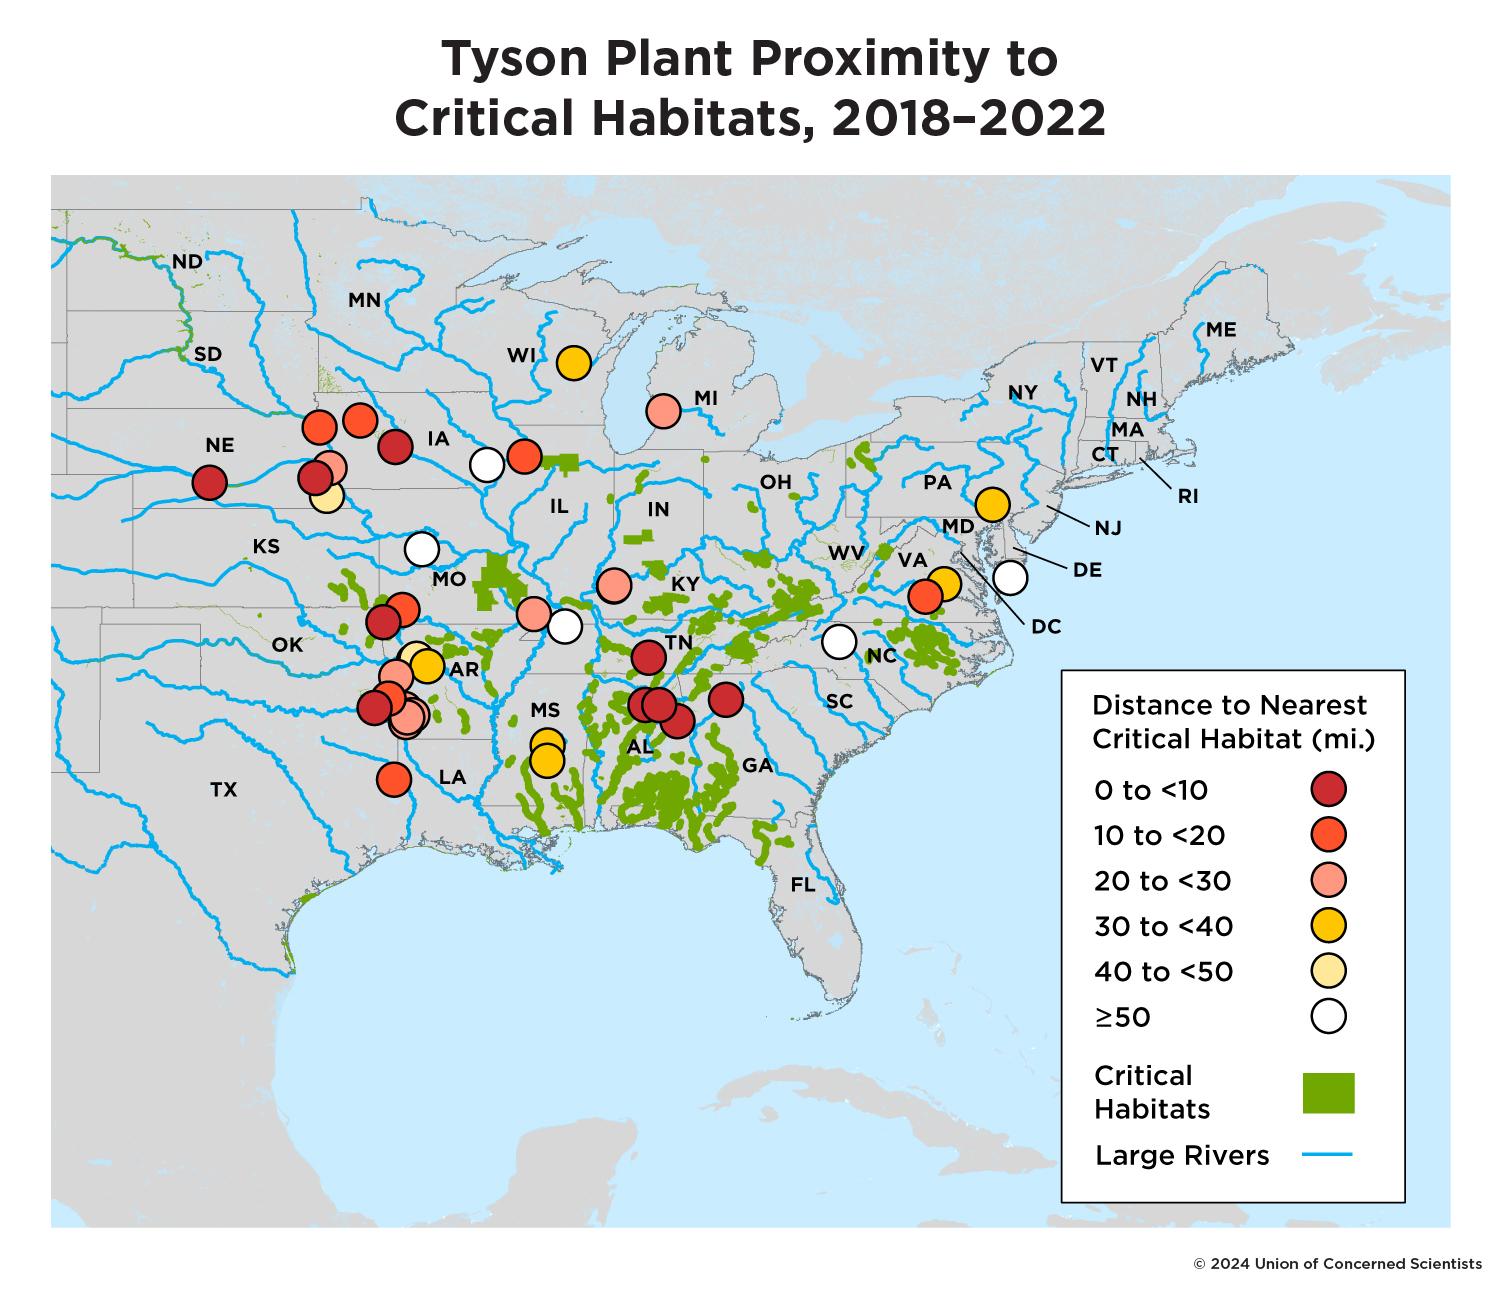 A map of the United States showing critical habitats in green and circles representing Tyson meat processing plants, with the color of each circle determined by distance to the nearest critical habitat